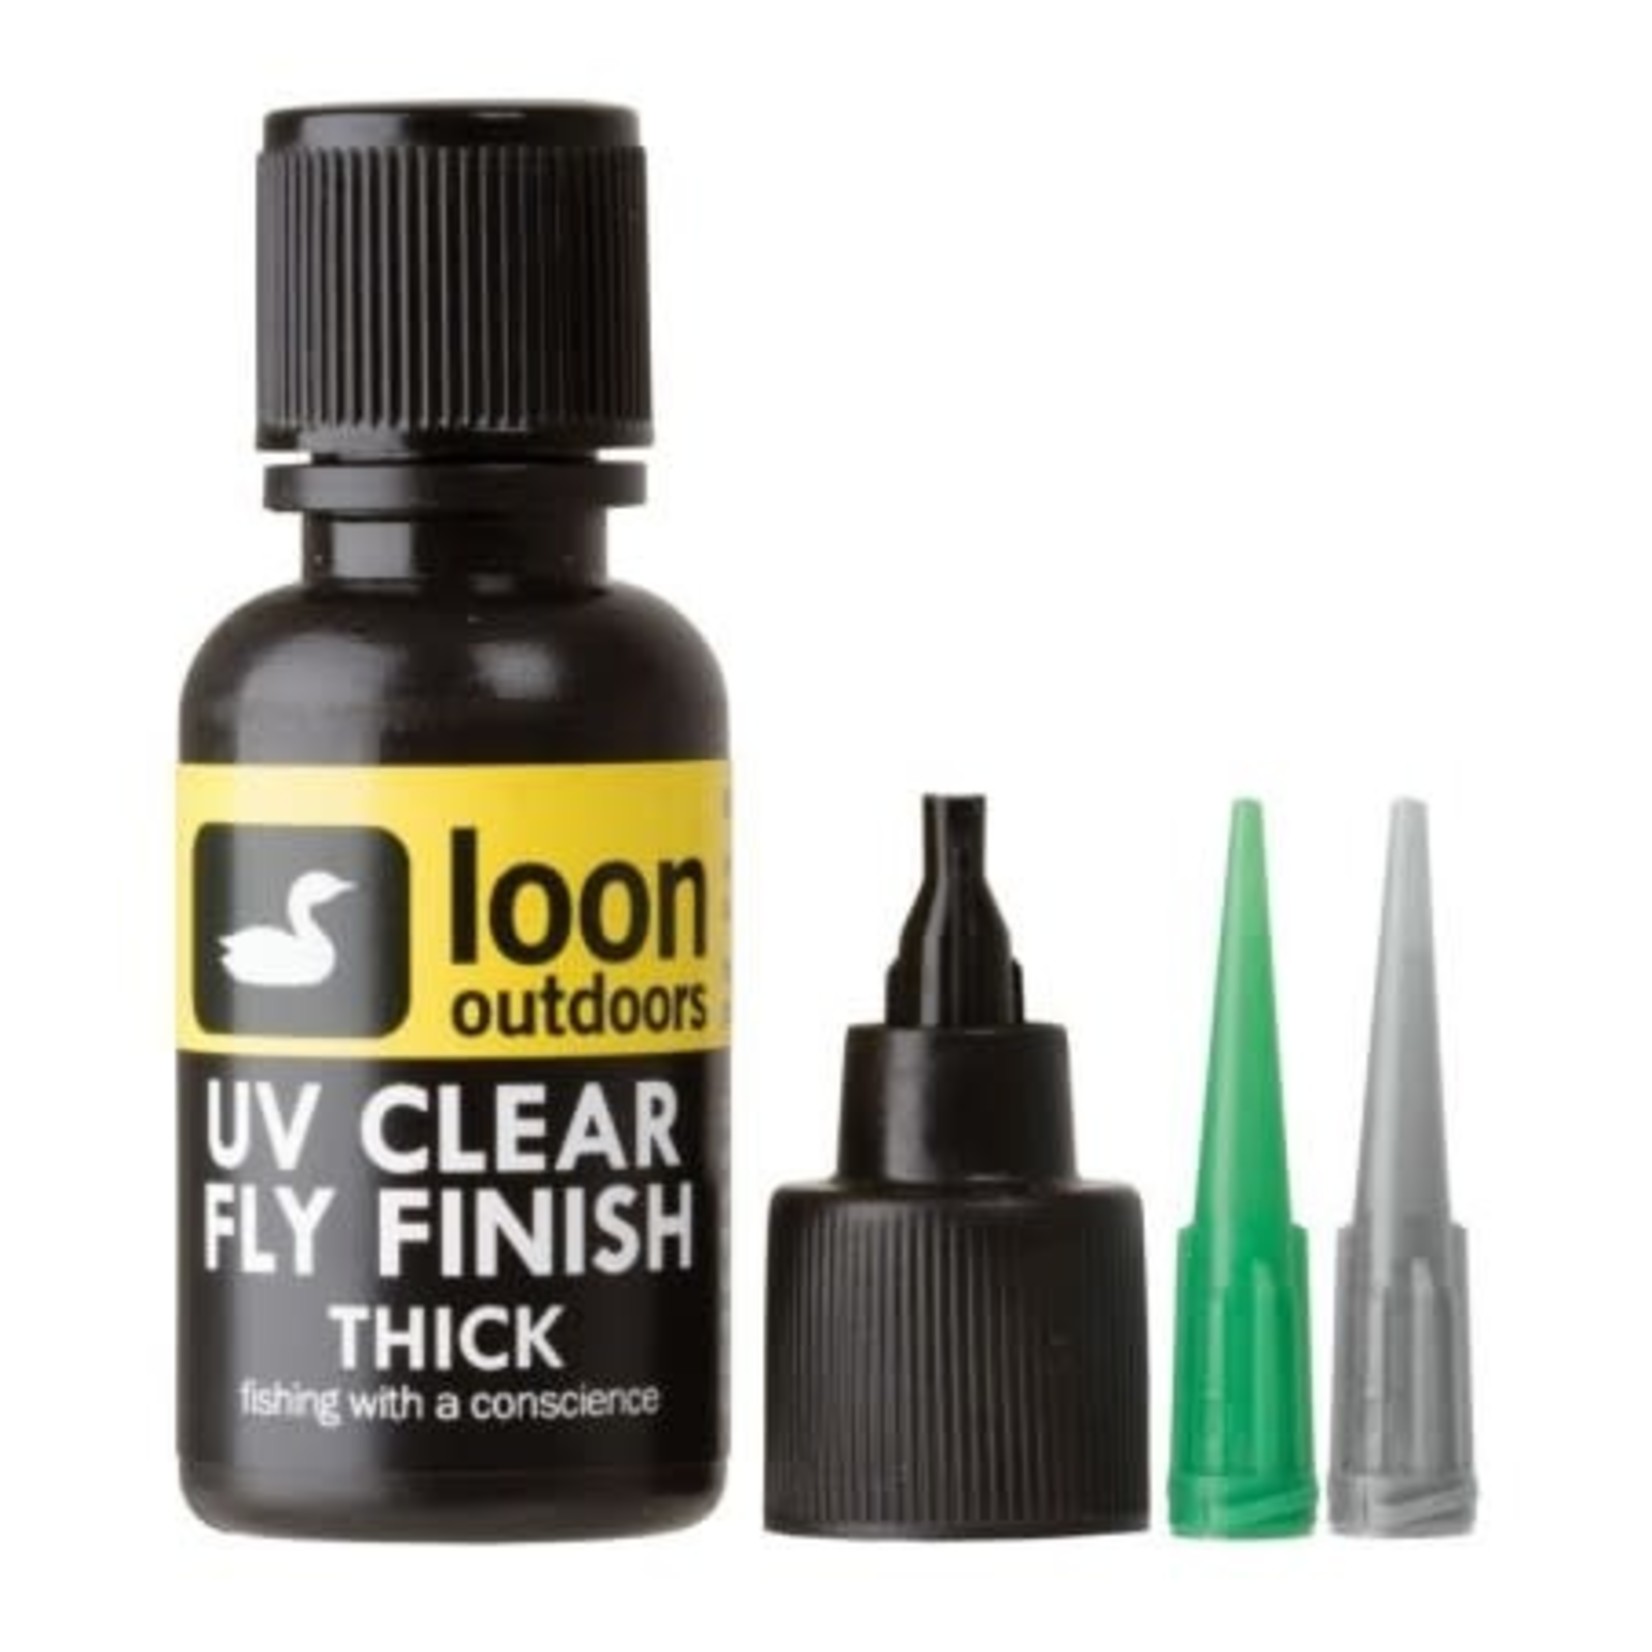 LOON OUTDOORS Loon Outdoors UV Clear Fly Finish, Thick- 0.5 fl oz bottle